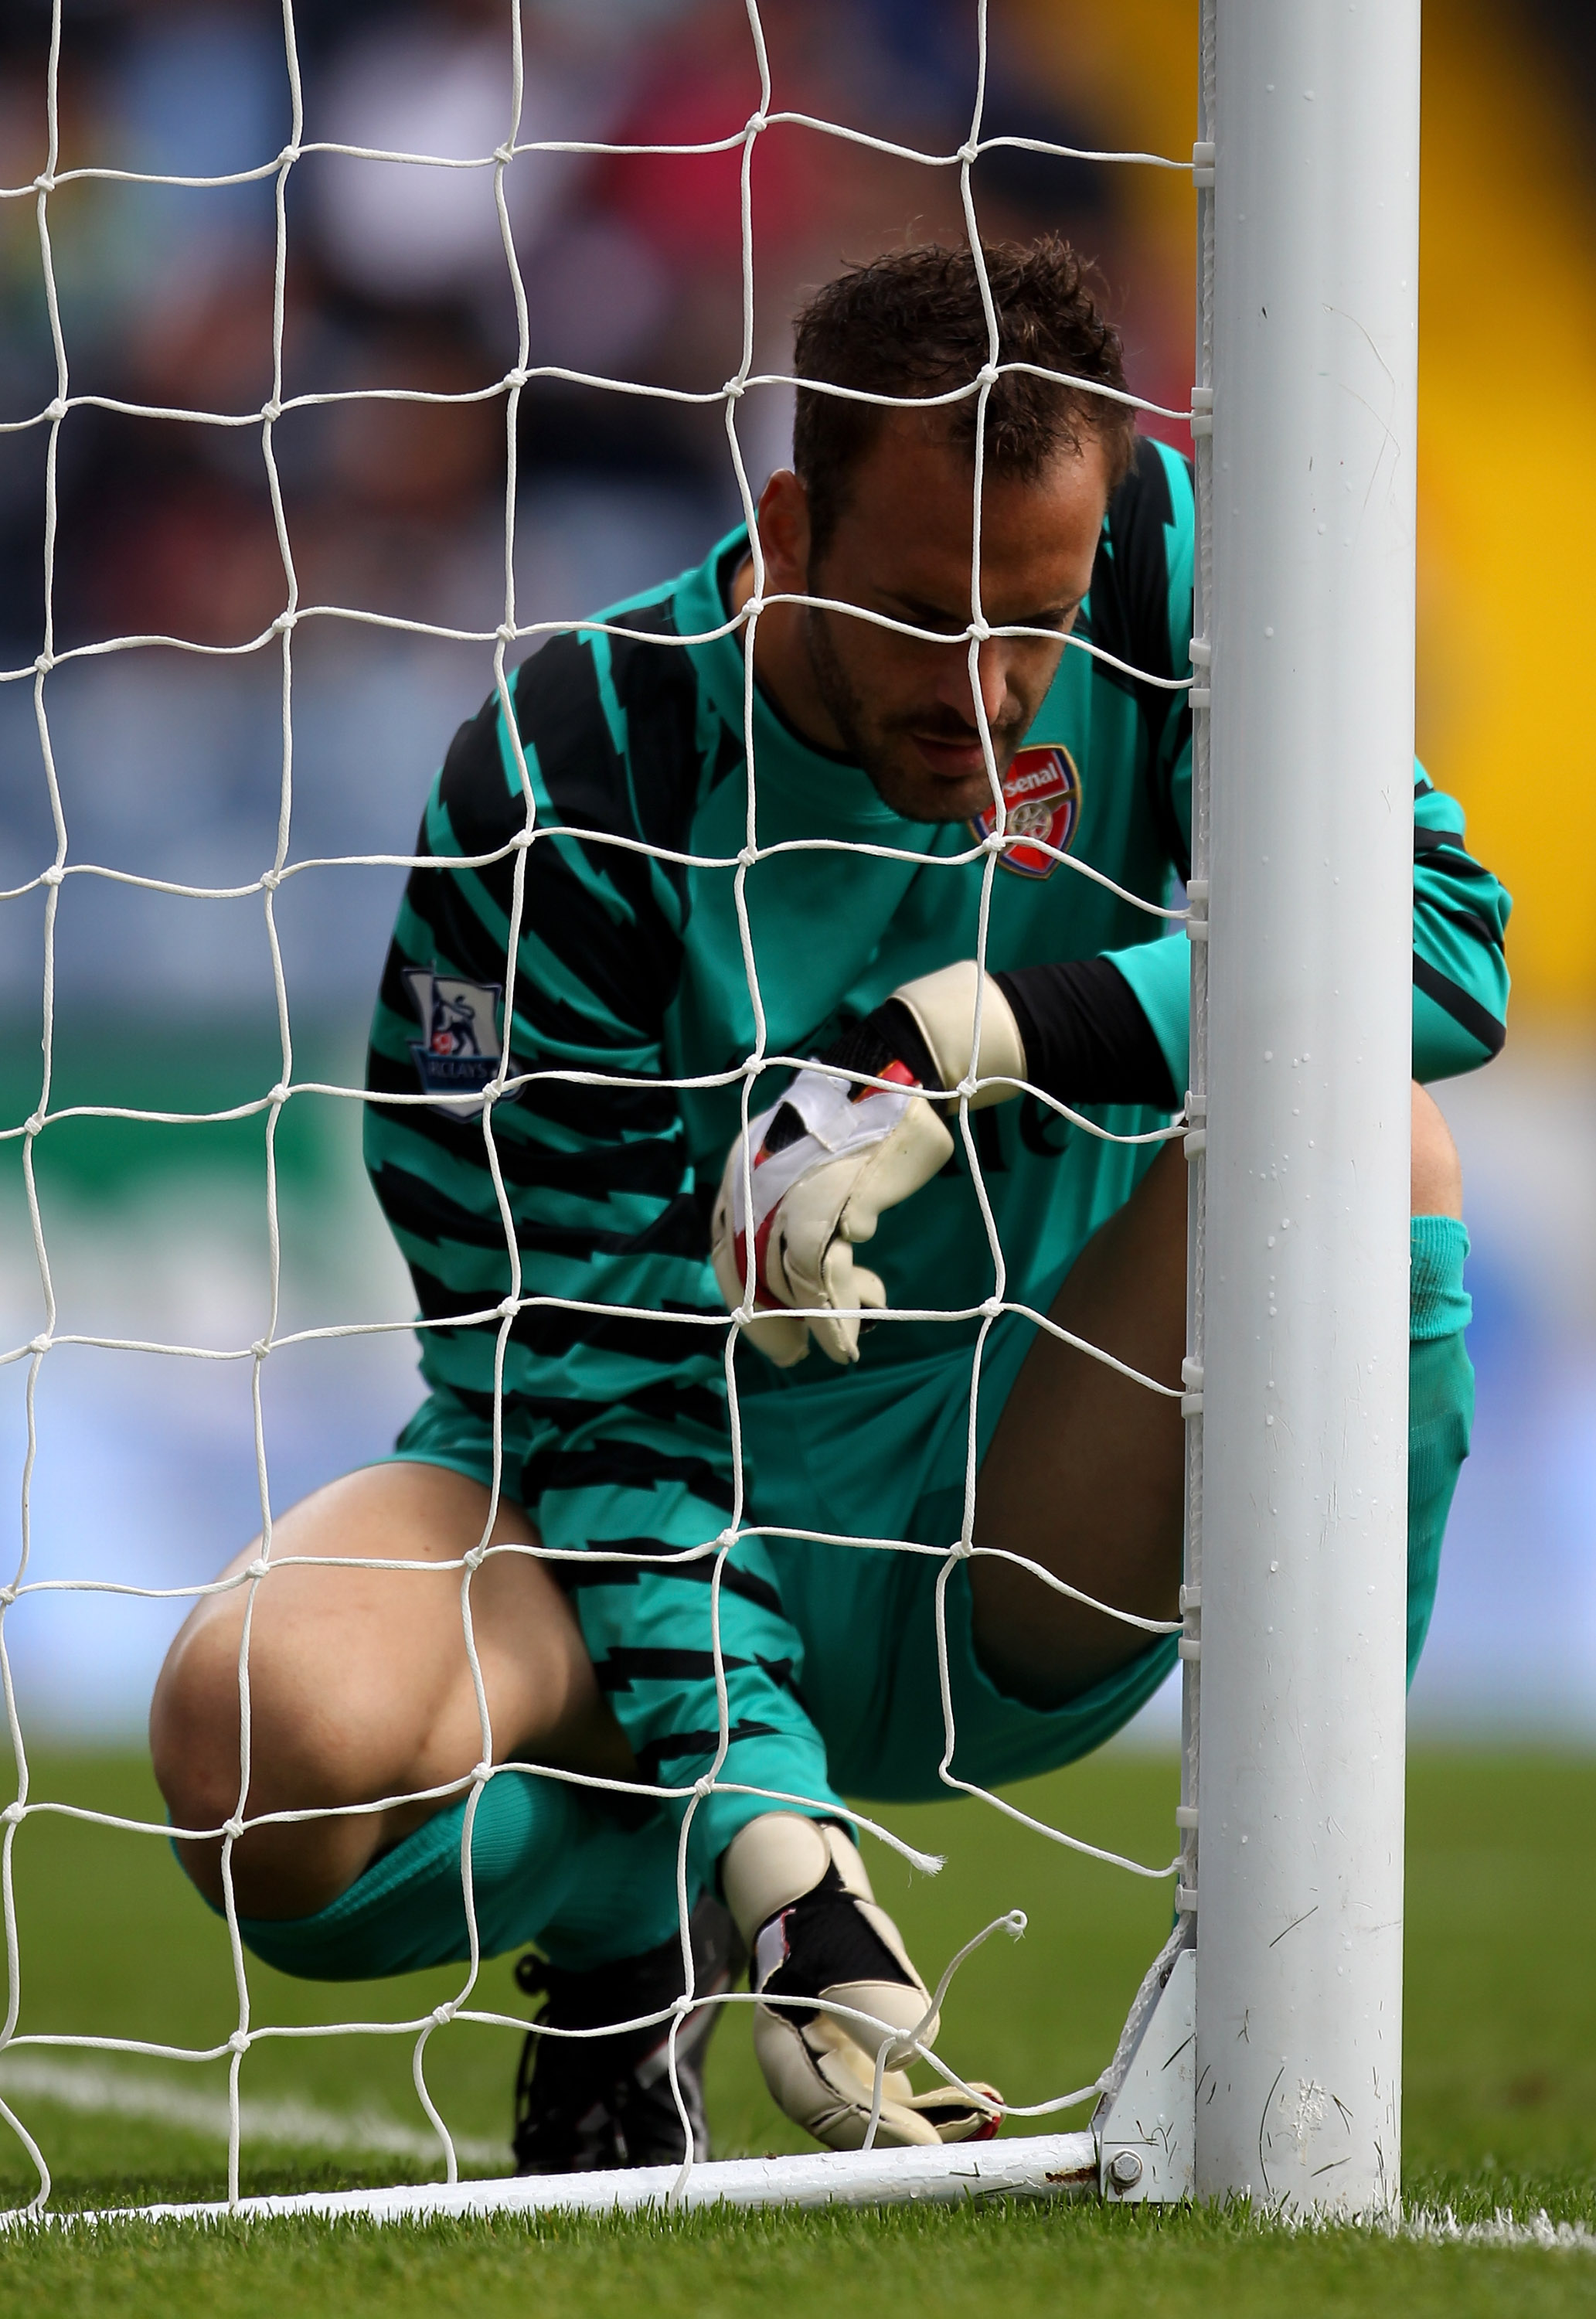 BLACKBURN, ENGLAND - AUGUST 28:  Manuel Almunia of Arsenal inspects the broken net during the Barclays Premier League match between Blackburn Rovers and Arsenal at Ewood Park on August 28, 2010 in Blackburn, England. (Photo by Alex Livesey/Getty Images)